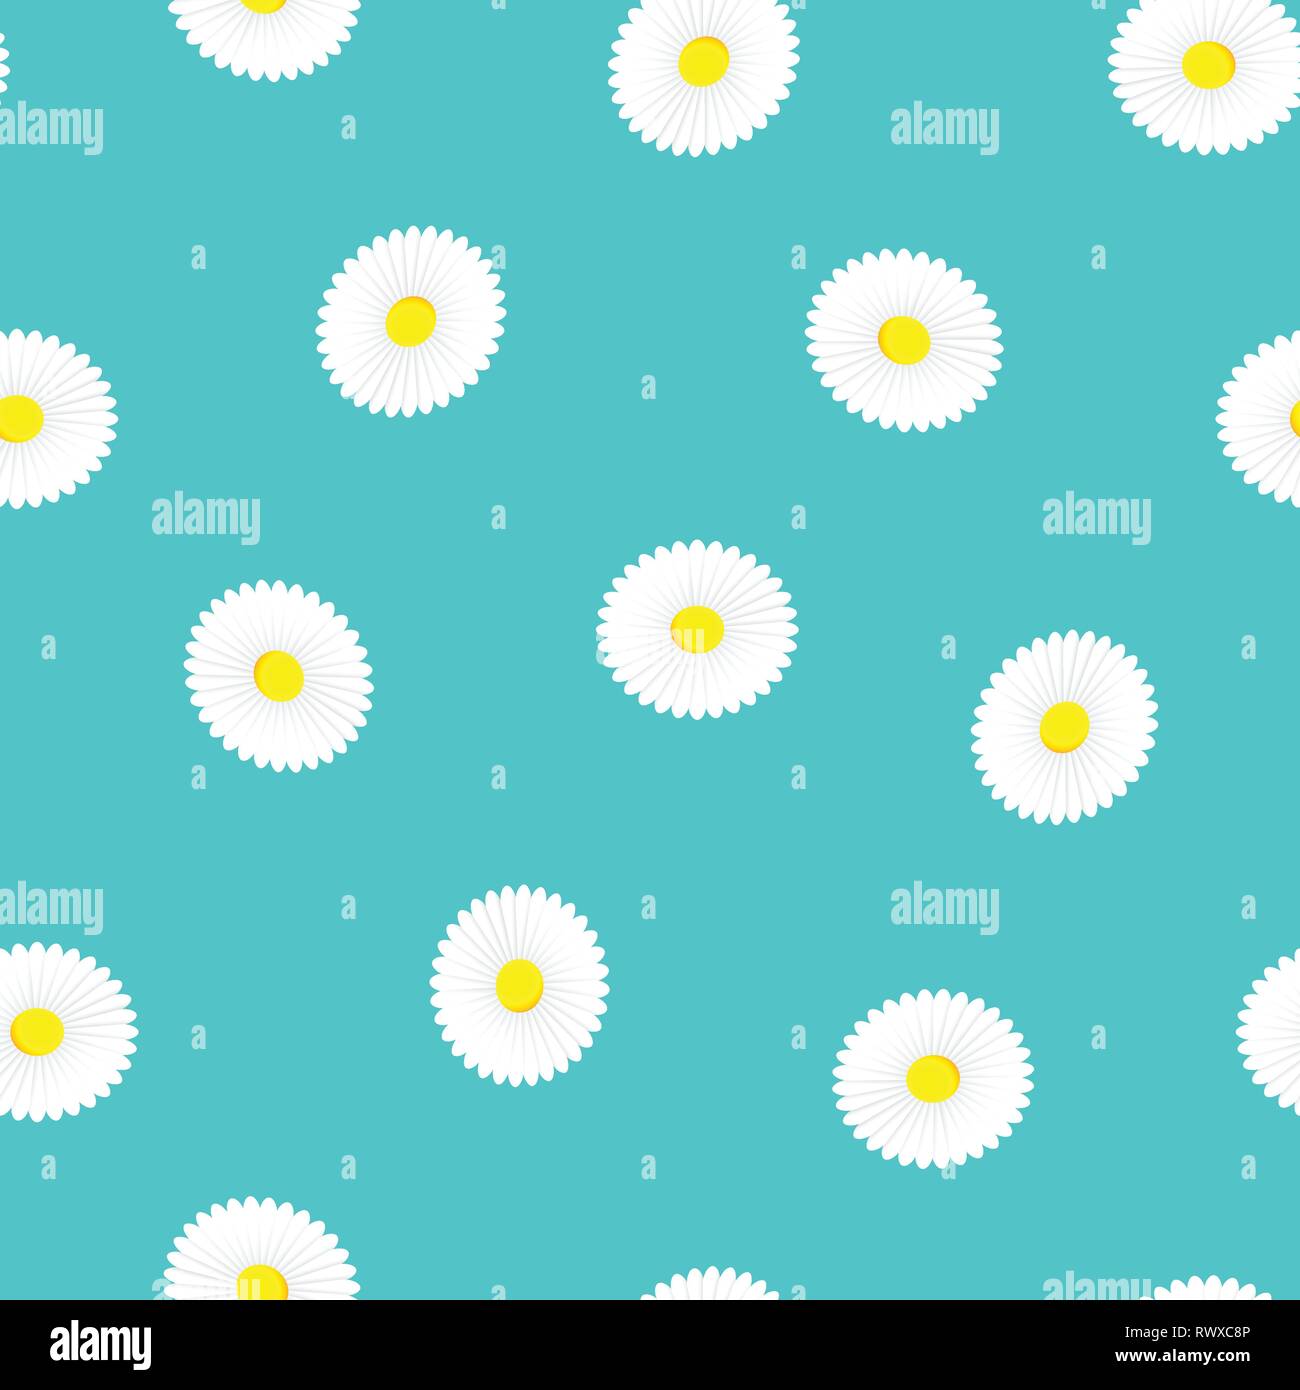 Daisy seamless pattern on turquoise background. Floral vintage texture concept for web design, covers, drapery, clothing materials, tablecloths, beddi Stock Vector